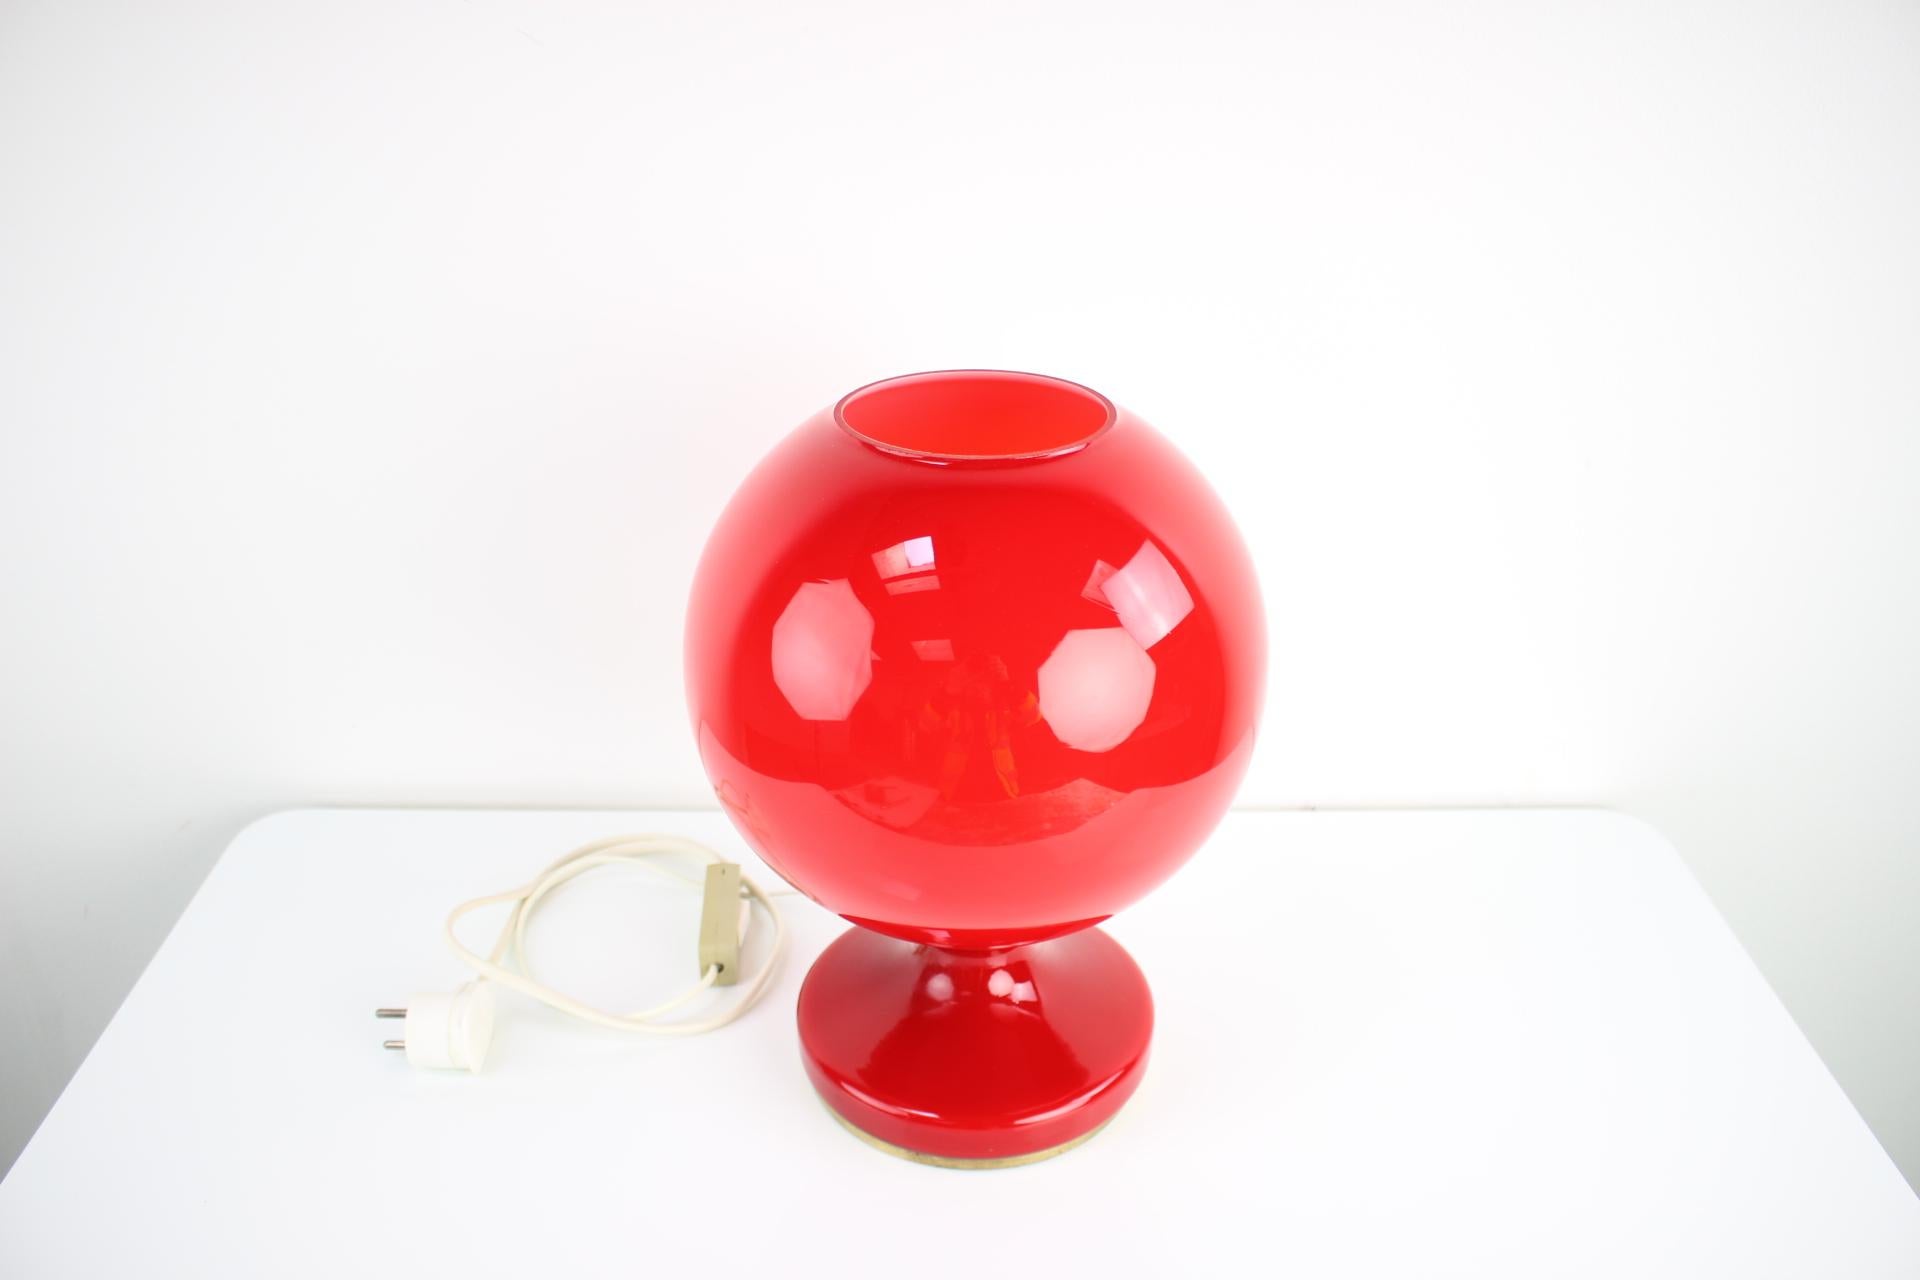 - Made in Czechoslovakia
- Made of metal, glass
- Re-polished
- Fully functional
- Good, original condition
- The color is red.